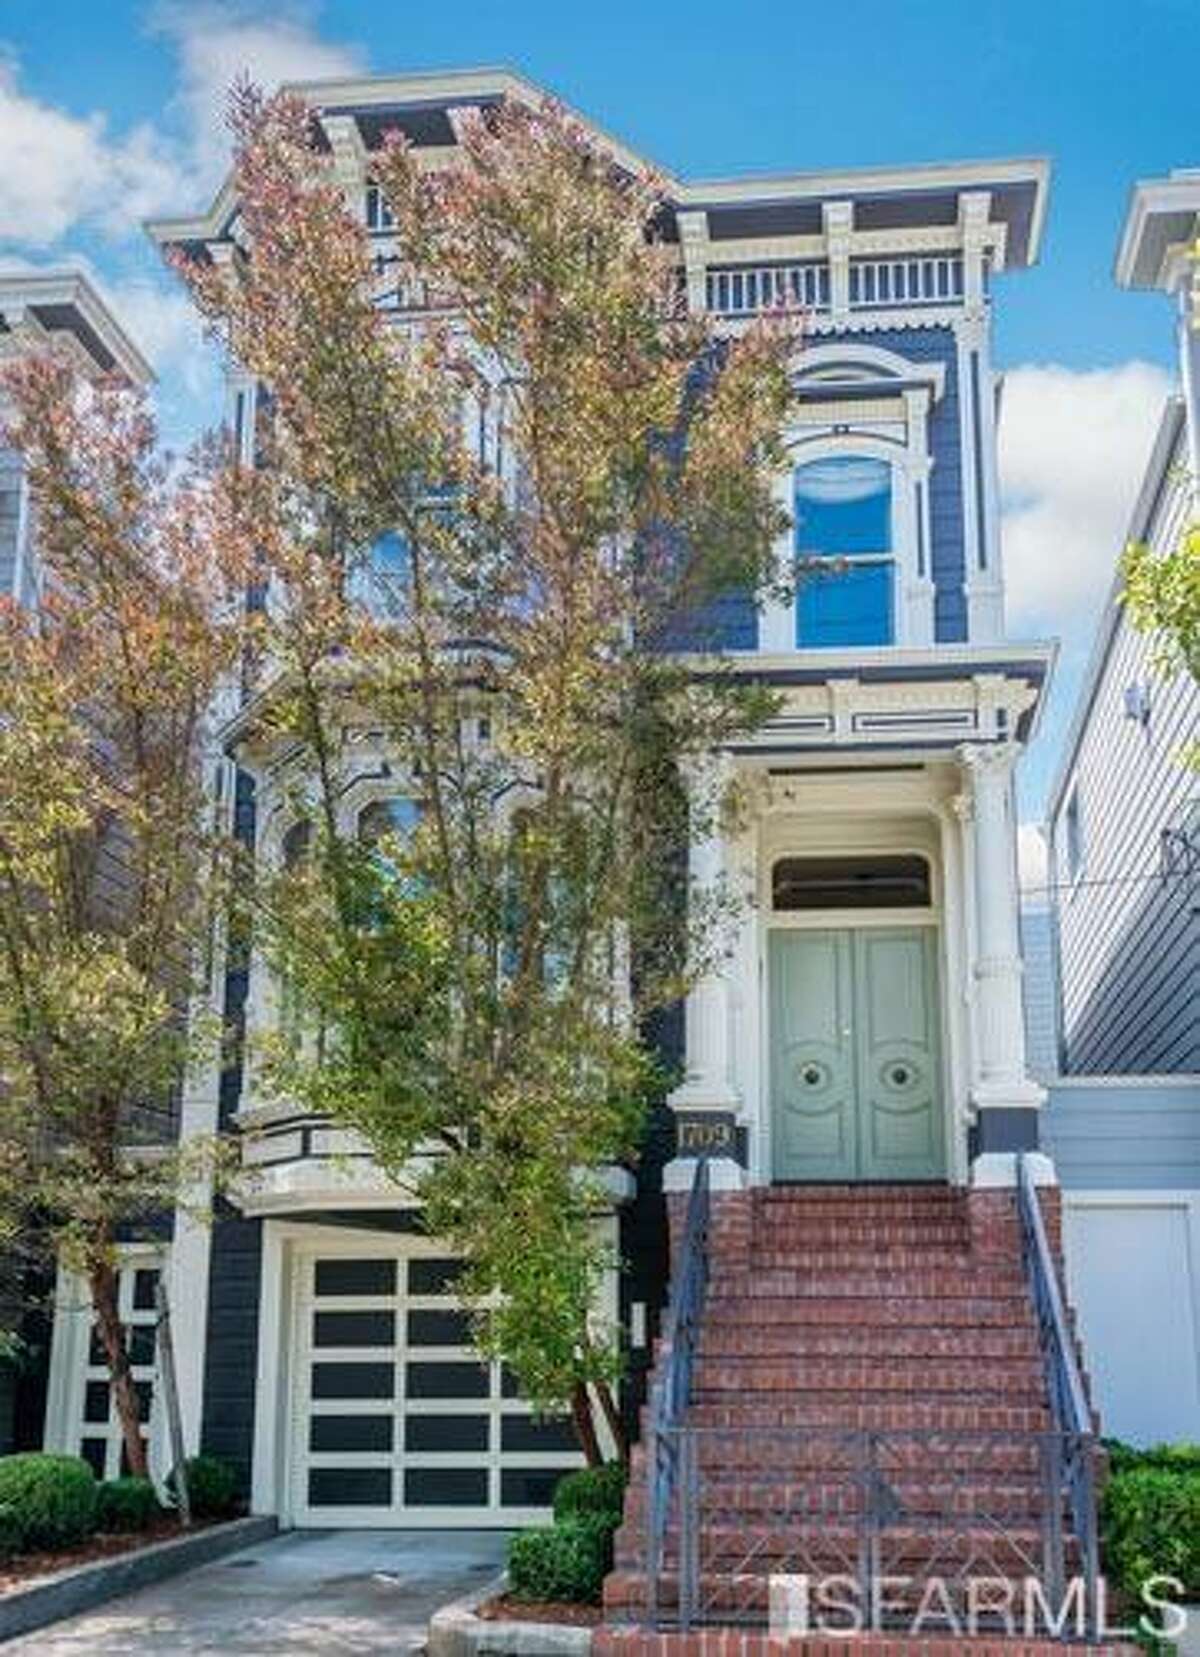 Click through the gallery to see what the house looked like when it hit the market in 2016: An 1883 San Francisco Victorian is on the market for $4.15 million.